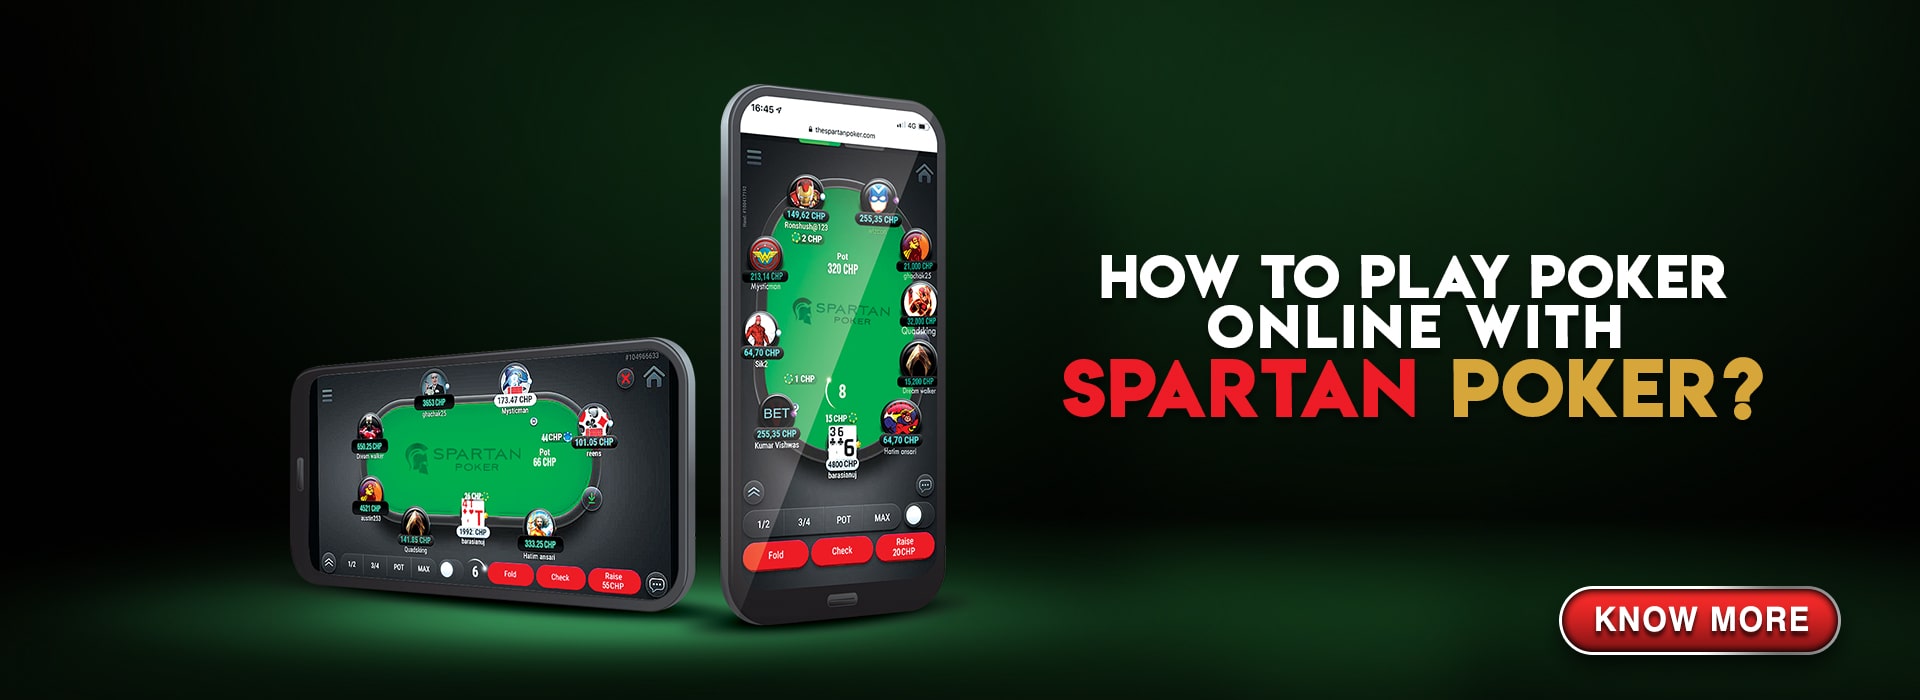 How to Get Spartan Poker in Androids?